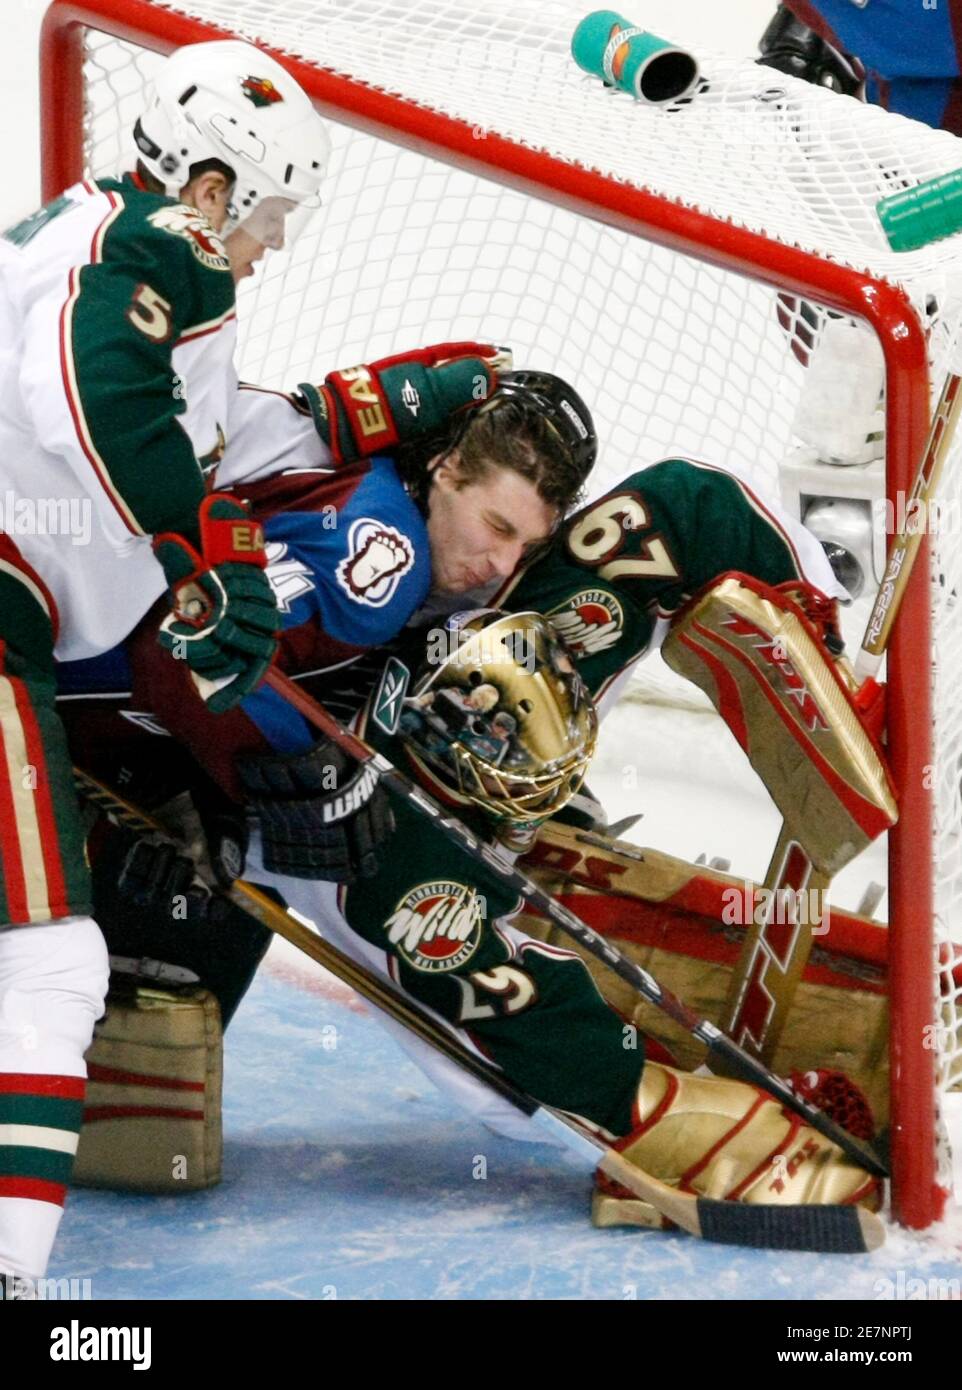 Colorado Avalanche Ryan Smyth (C) is sandwiched in the crease between Minnesota Wild Kim Johnsson (L) and goaltender Josh Harding during the third period in Game 4 of their NHL Western Conference quarter-final hockey game in Denver April 15, 2008. REUTERS/Rick Wilking (UNITED STATES) Stock Photo